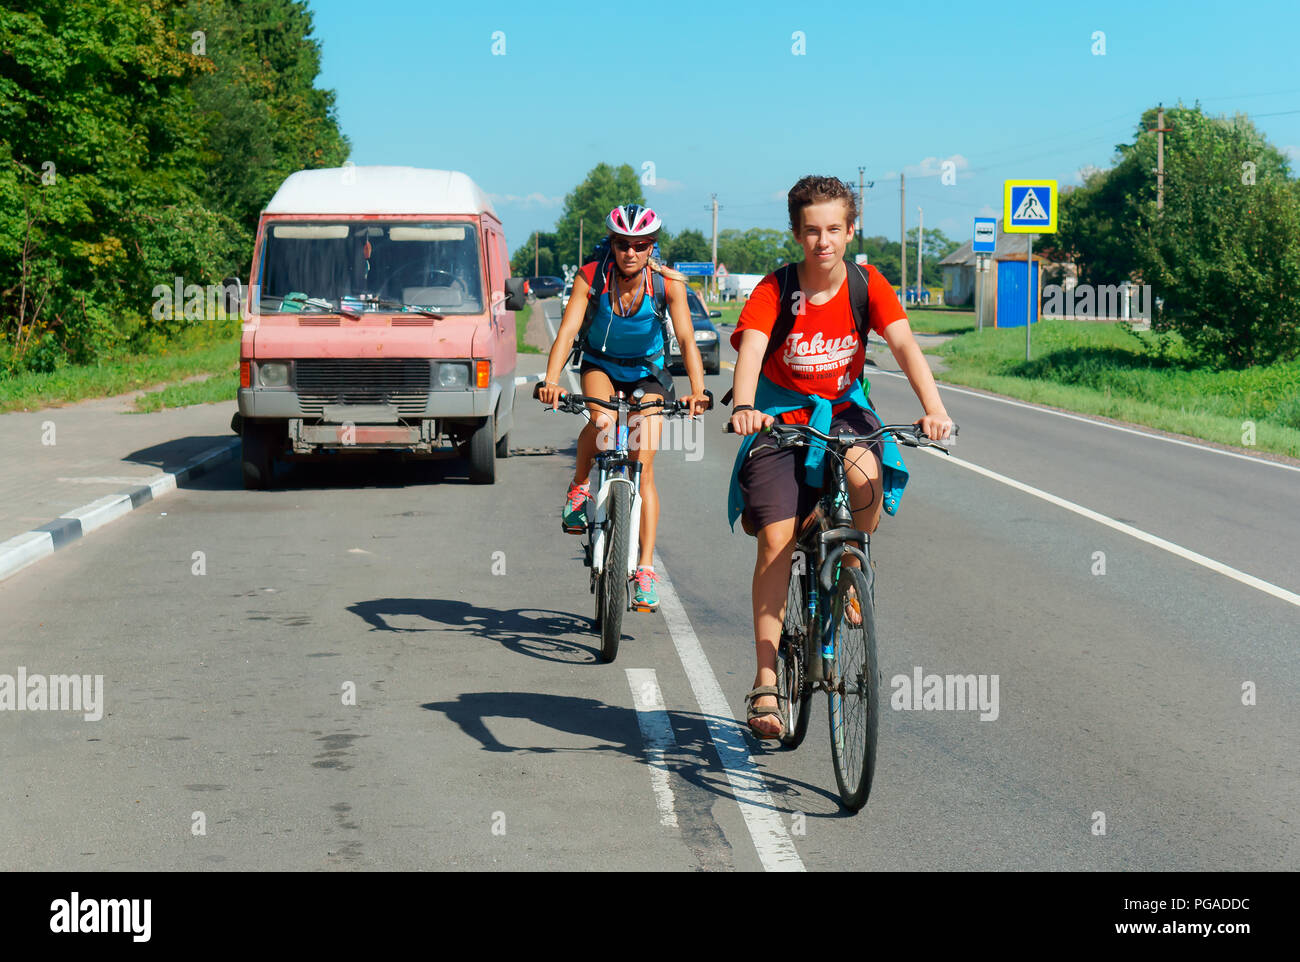 Kaliningrad, Russia, August 4, 2018, man and woman riding bicycles on the roadway, cyclists on the road Stock Photo